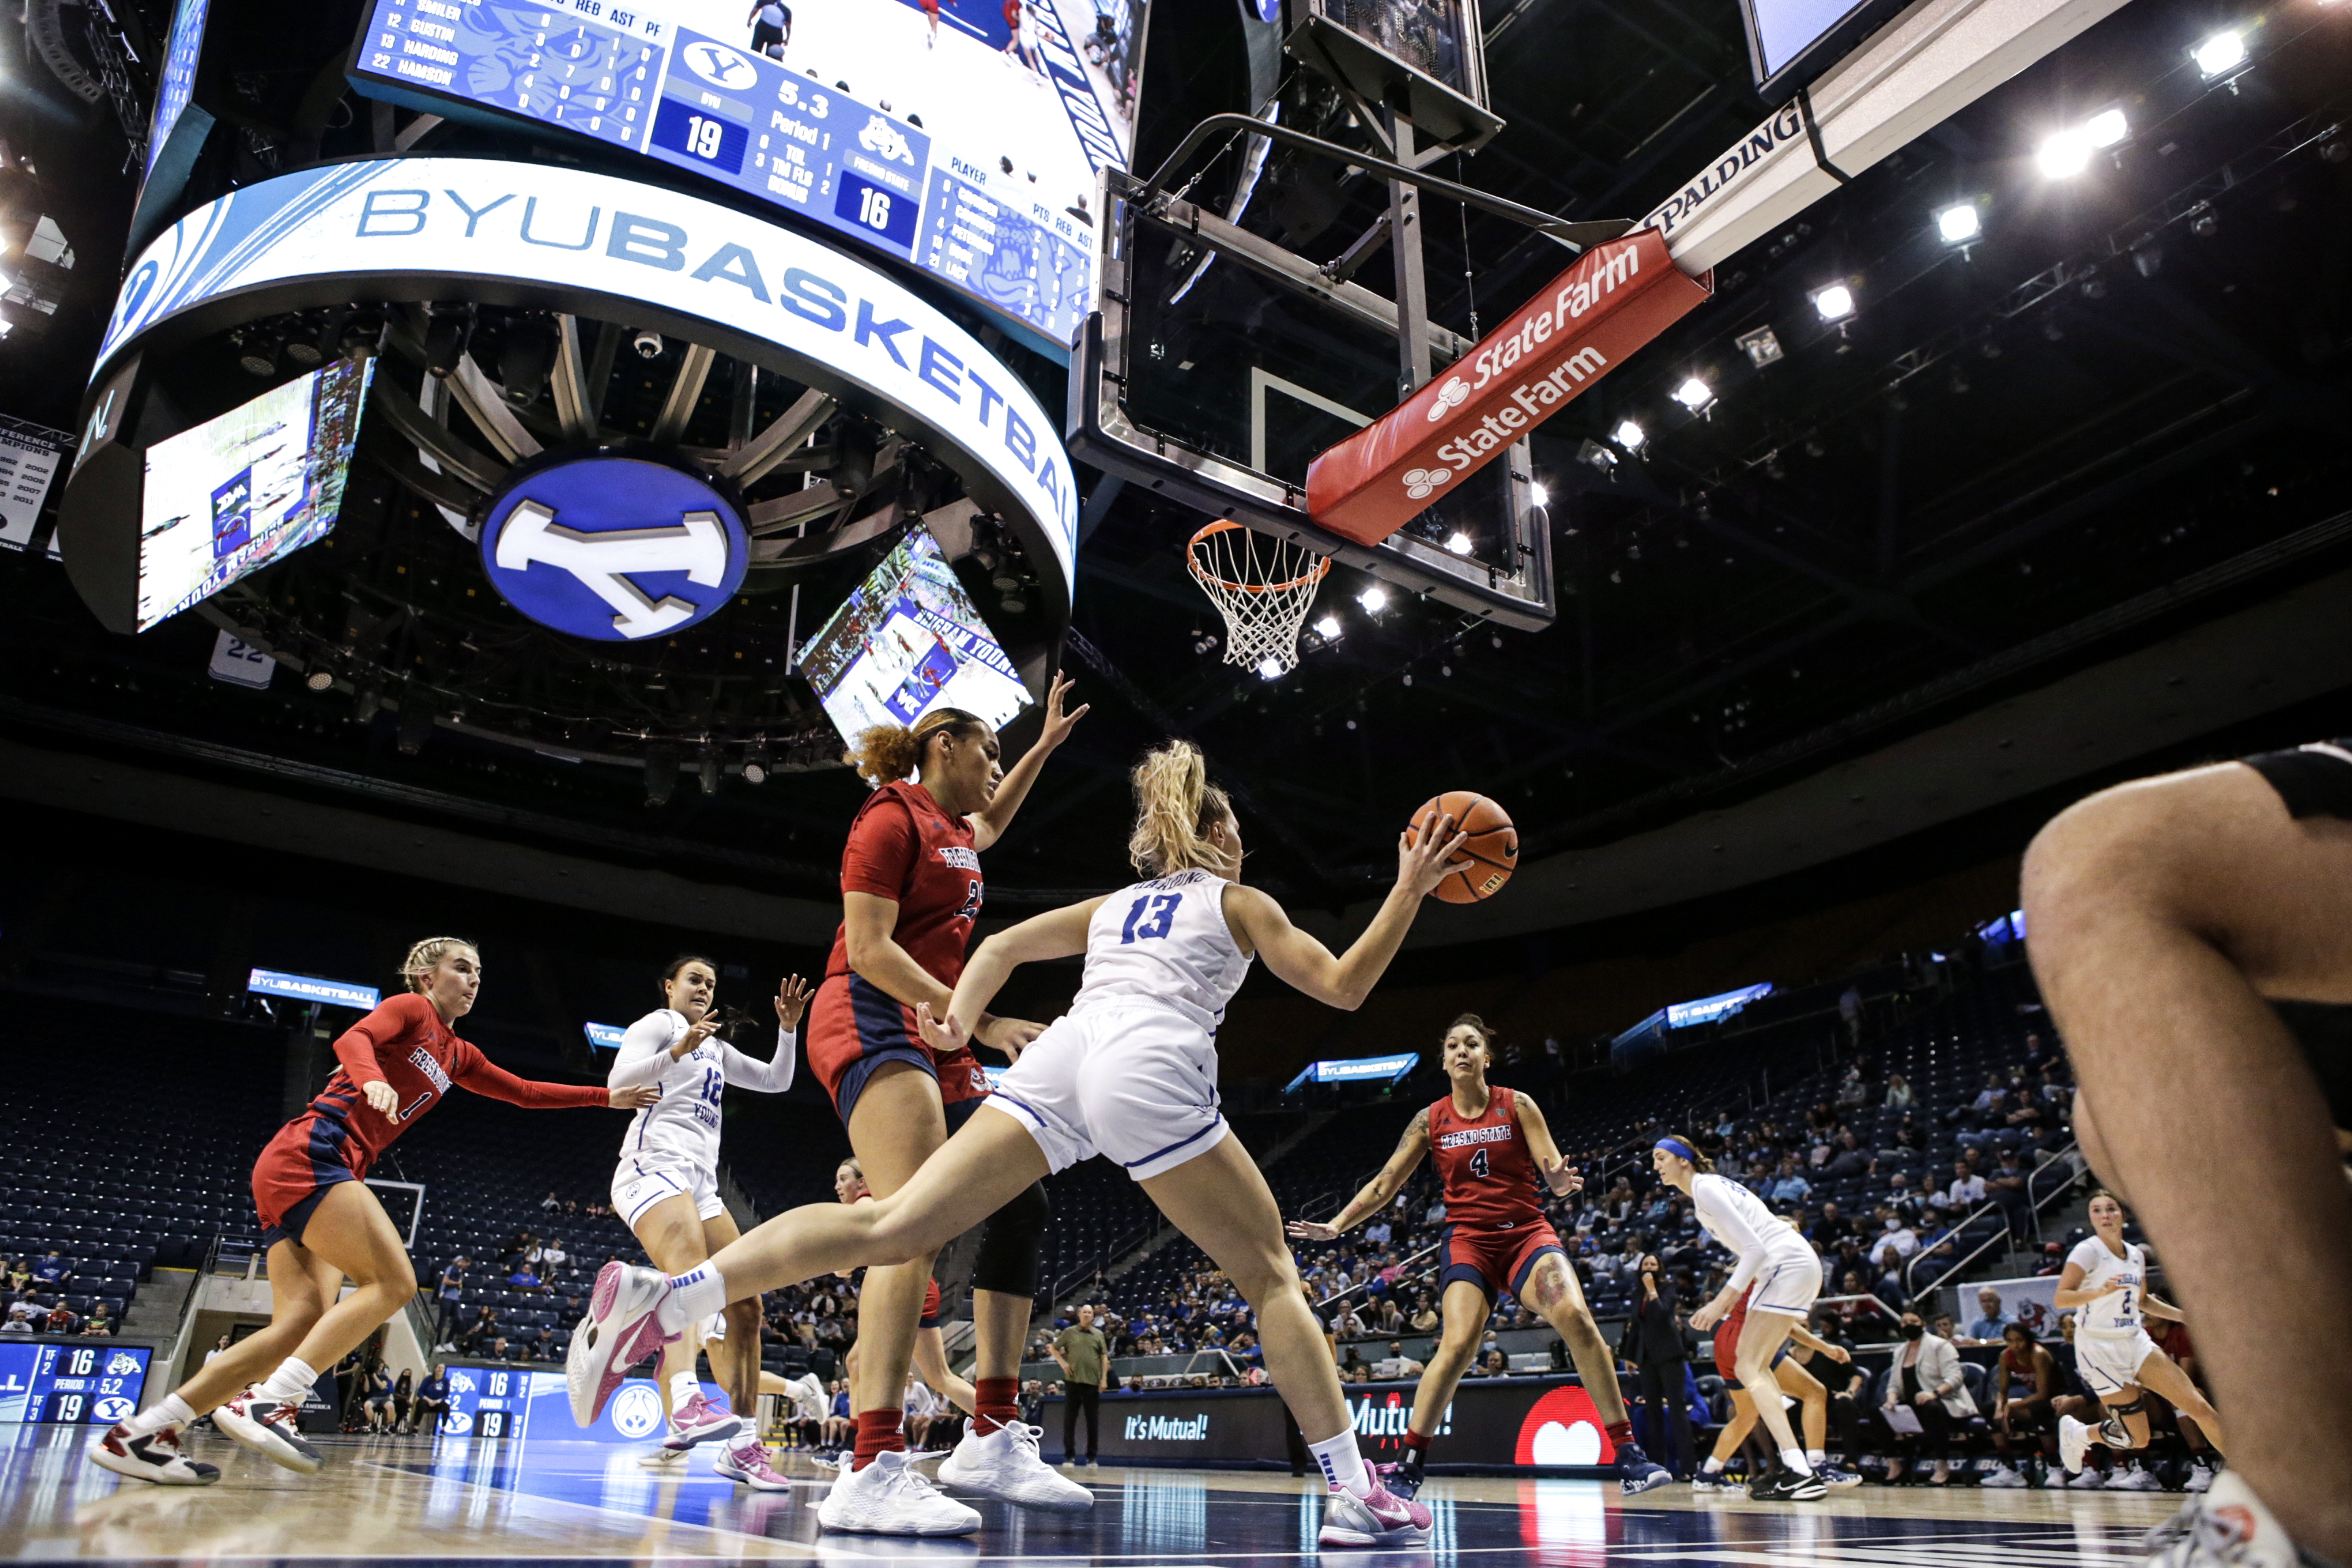 Paisley Hardin finds Shaylee Gonzales for a three point shot in an 80-64 BYU win over the Fresno State Bulldogs in the Marriott Center.